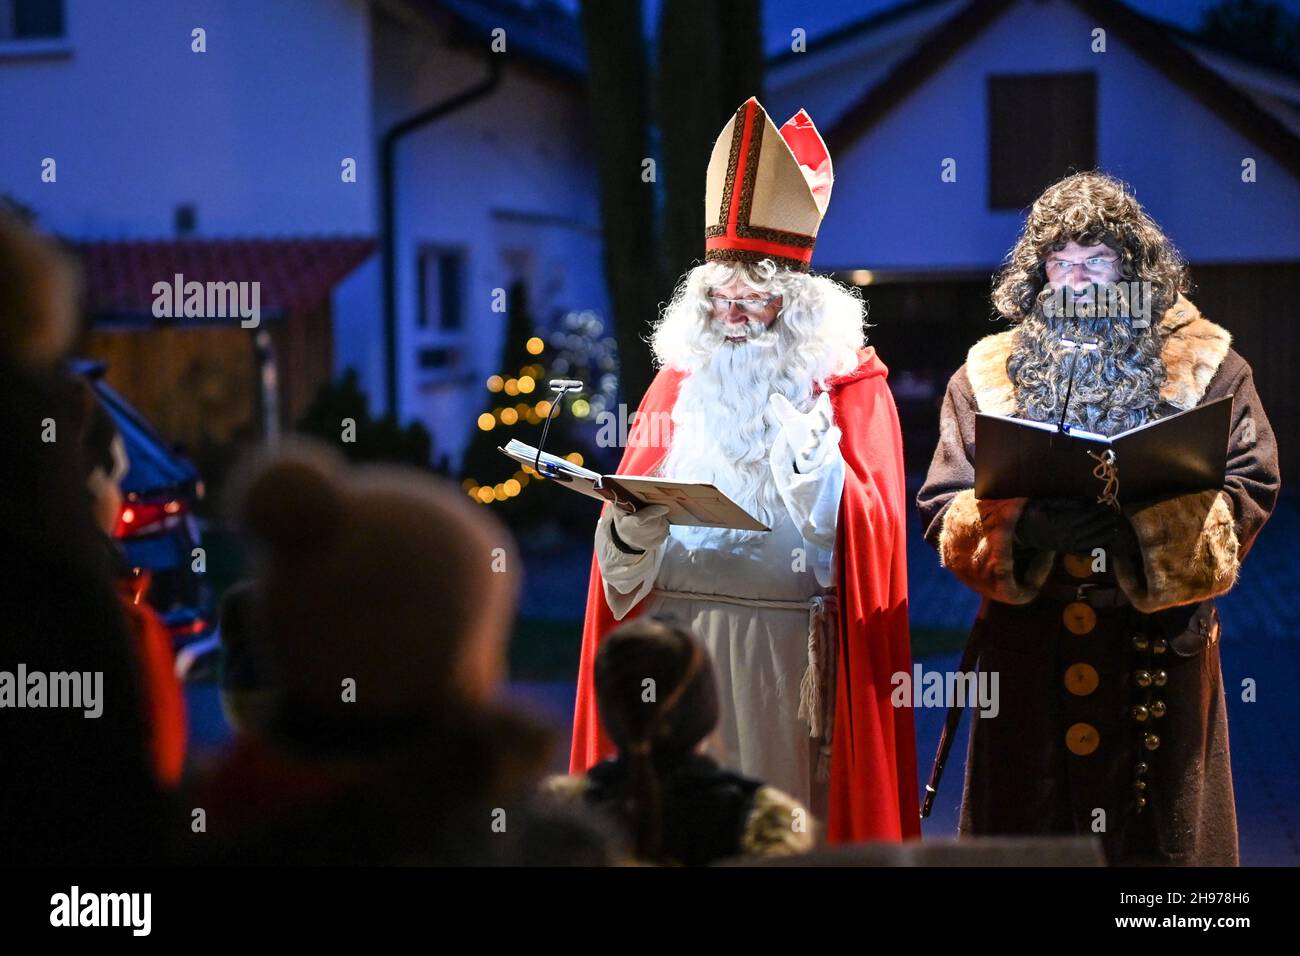 Friedrichshafen, Germany. 04th Dec, 2021. Dressed as St. Nicholas and his servant Ruprecht, Erich Schwarz (in red and with mitre) and Michael Huber (Ruprecht) visit the Herold family from Ailingen near Friedrichshafen. The two actors belong to the St. Nicholas Guild of Friedrichshafen, which wants to preserve the tradition of St. Nicholas of Myra. During the visit, the children of two families recite poems and musical pieces, and in return, St. Nicholas and Ruprecht read from their books, giving reprimands and praise. Credit: Felix Kästle/dpa/Alamy Live News Stock Photo